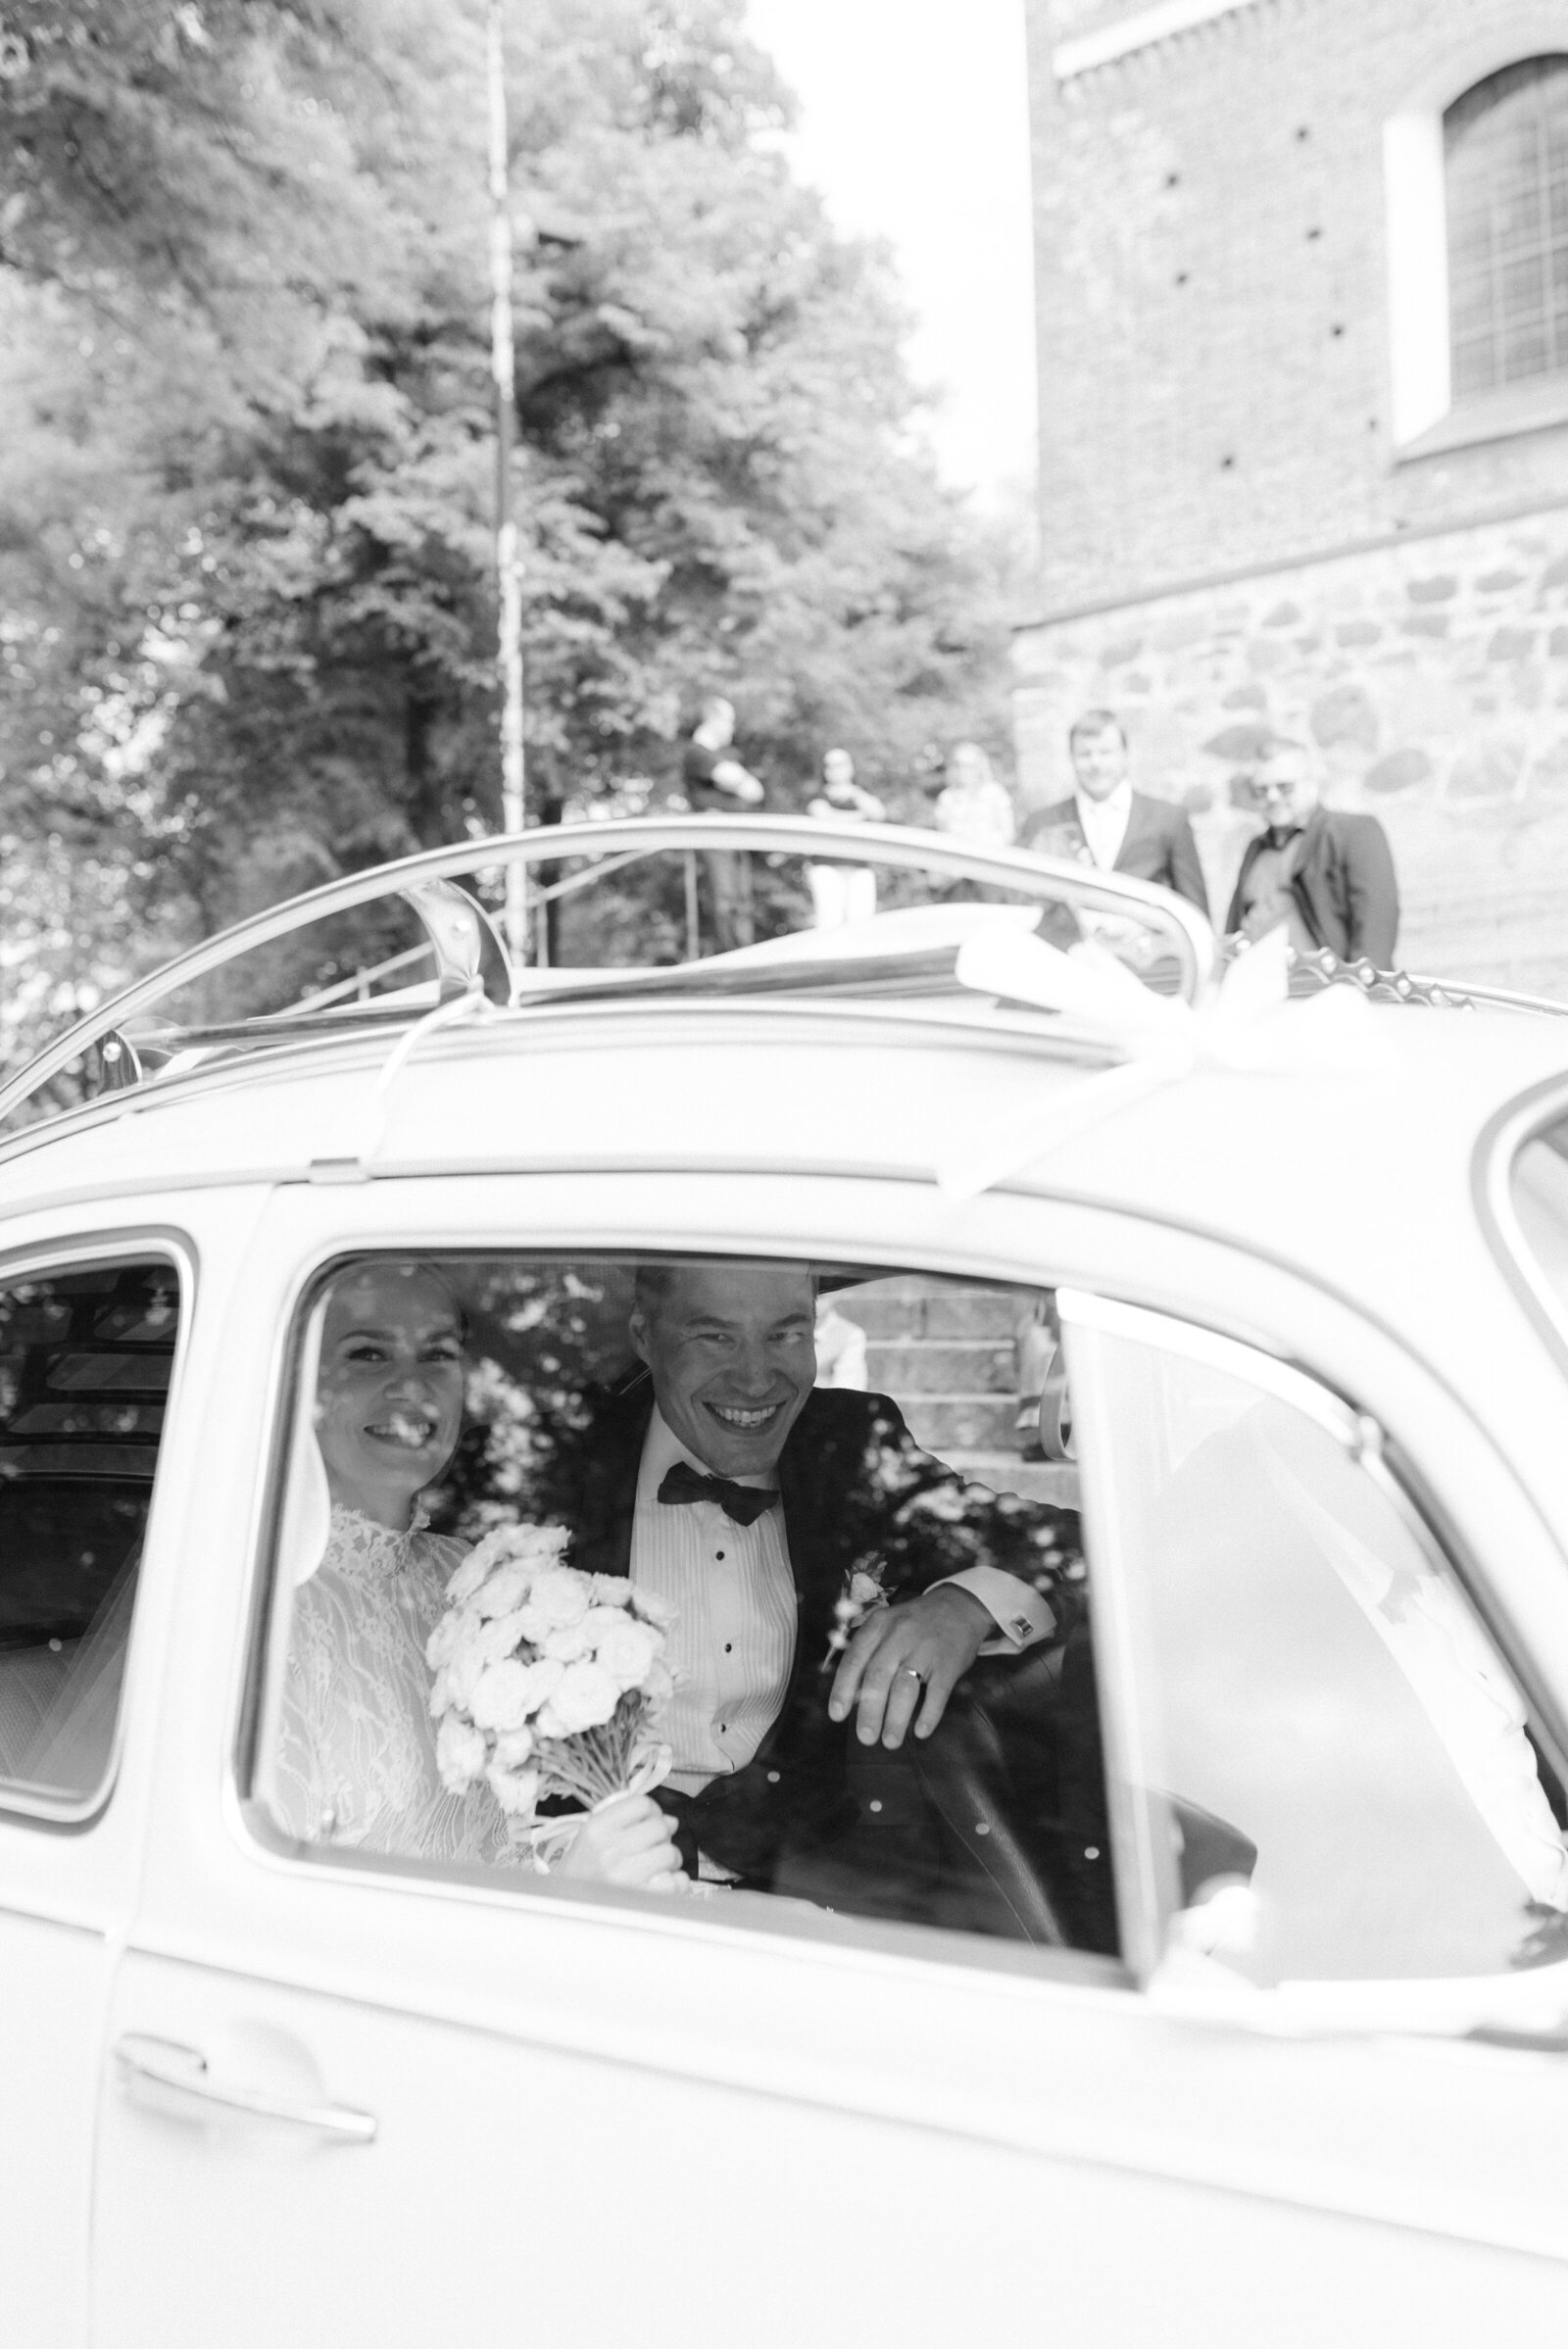 Wedding couple sitting on the car after the ceremony. Image by wedding photographer Hannika Gabrielsson.